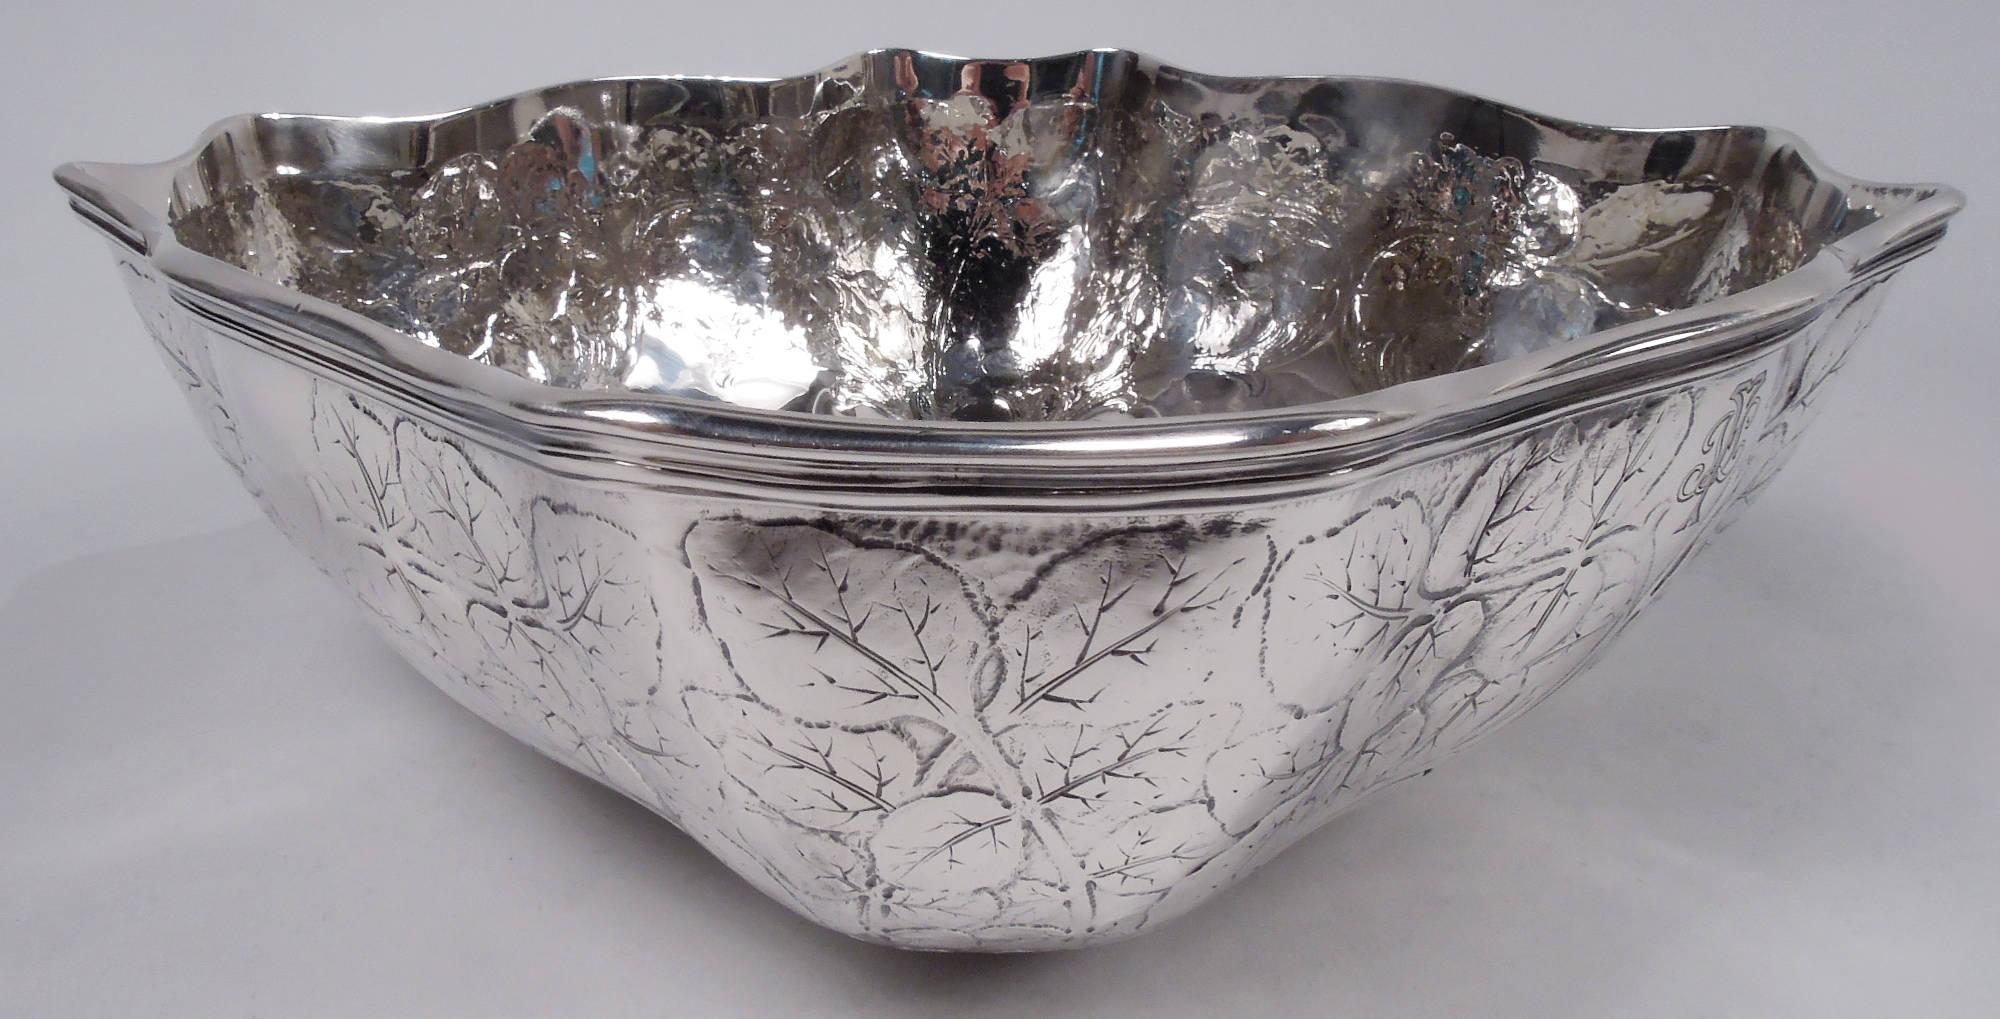 Edwardian Art Nouveau sterling silver bowl. Made by Tiffany & Co. in New York, ca 1907. Four curved and wavy sides with concave corners and molded rim. On exterior are acid-etched ogee frames (vacant) surmounted by dense leafing branches. Engraved